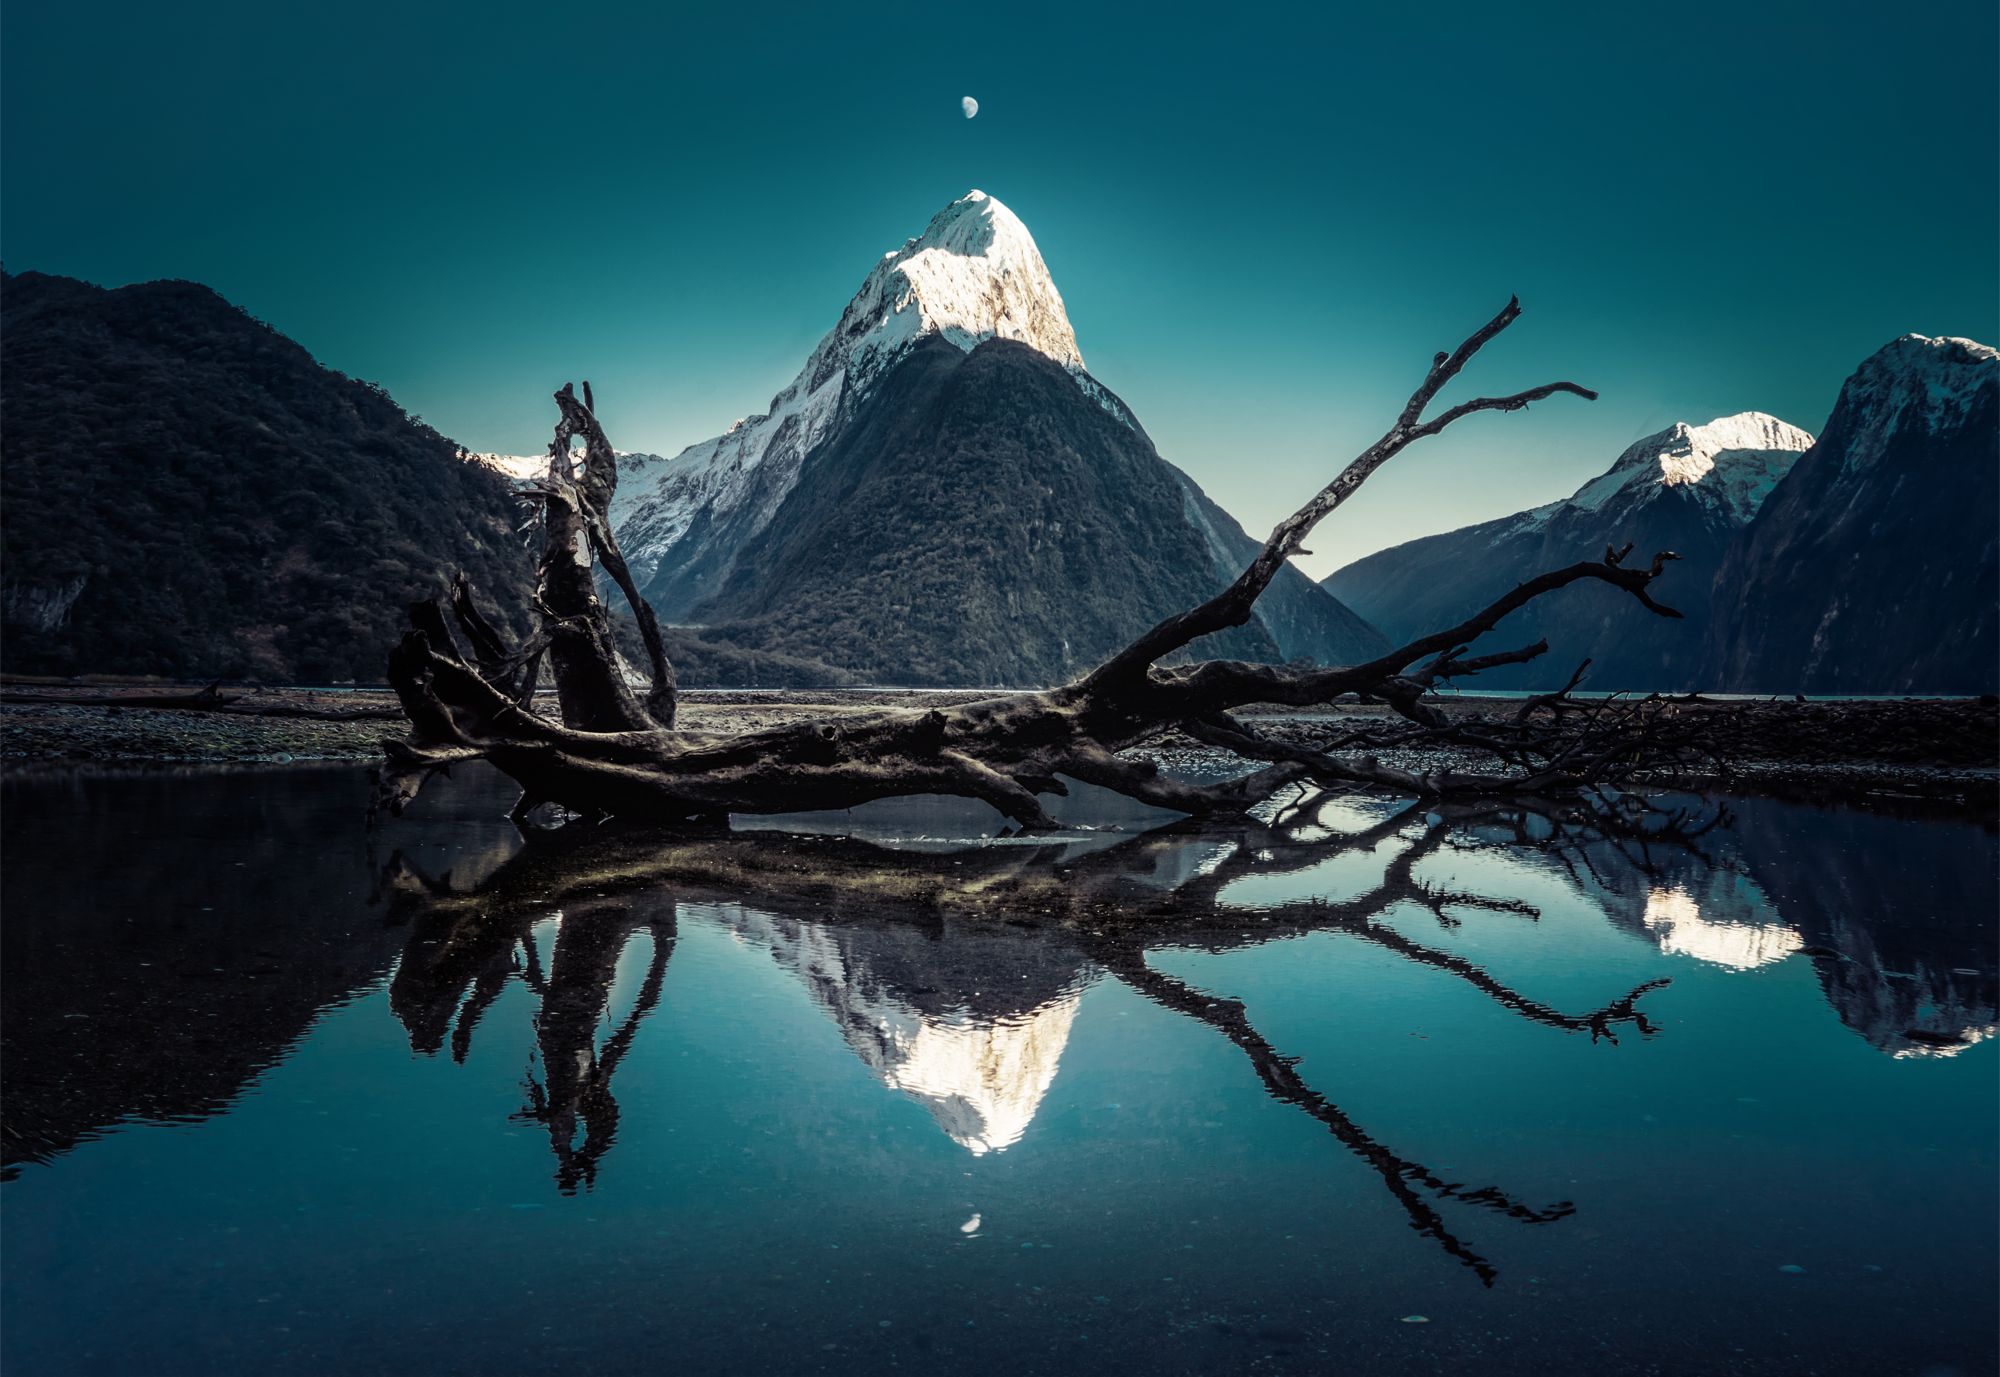 General 2000x1377 Trey Ratcliff landscape mountains Moon reflection water